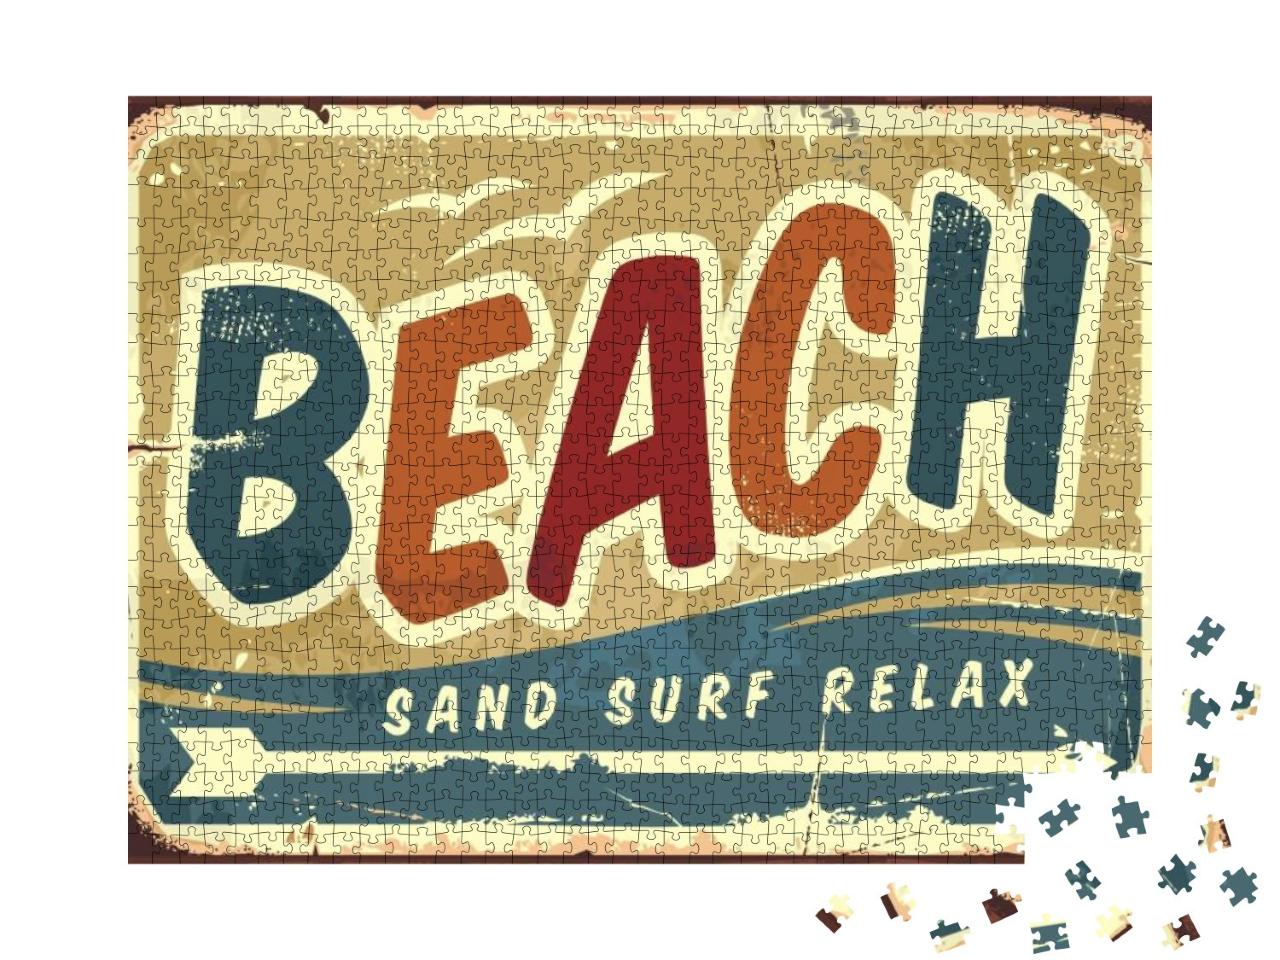 Beach Sign Vector Retro Background. Vintage Signboard wit... Jigsaw Puzzle with 1000 pieces